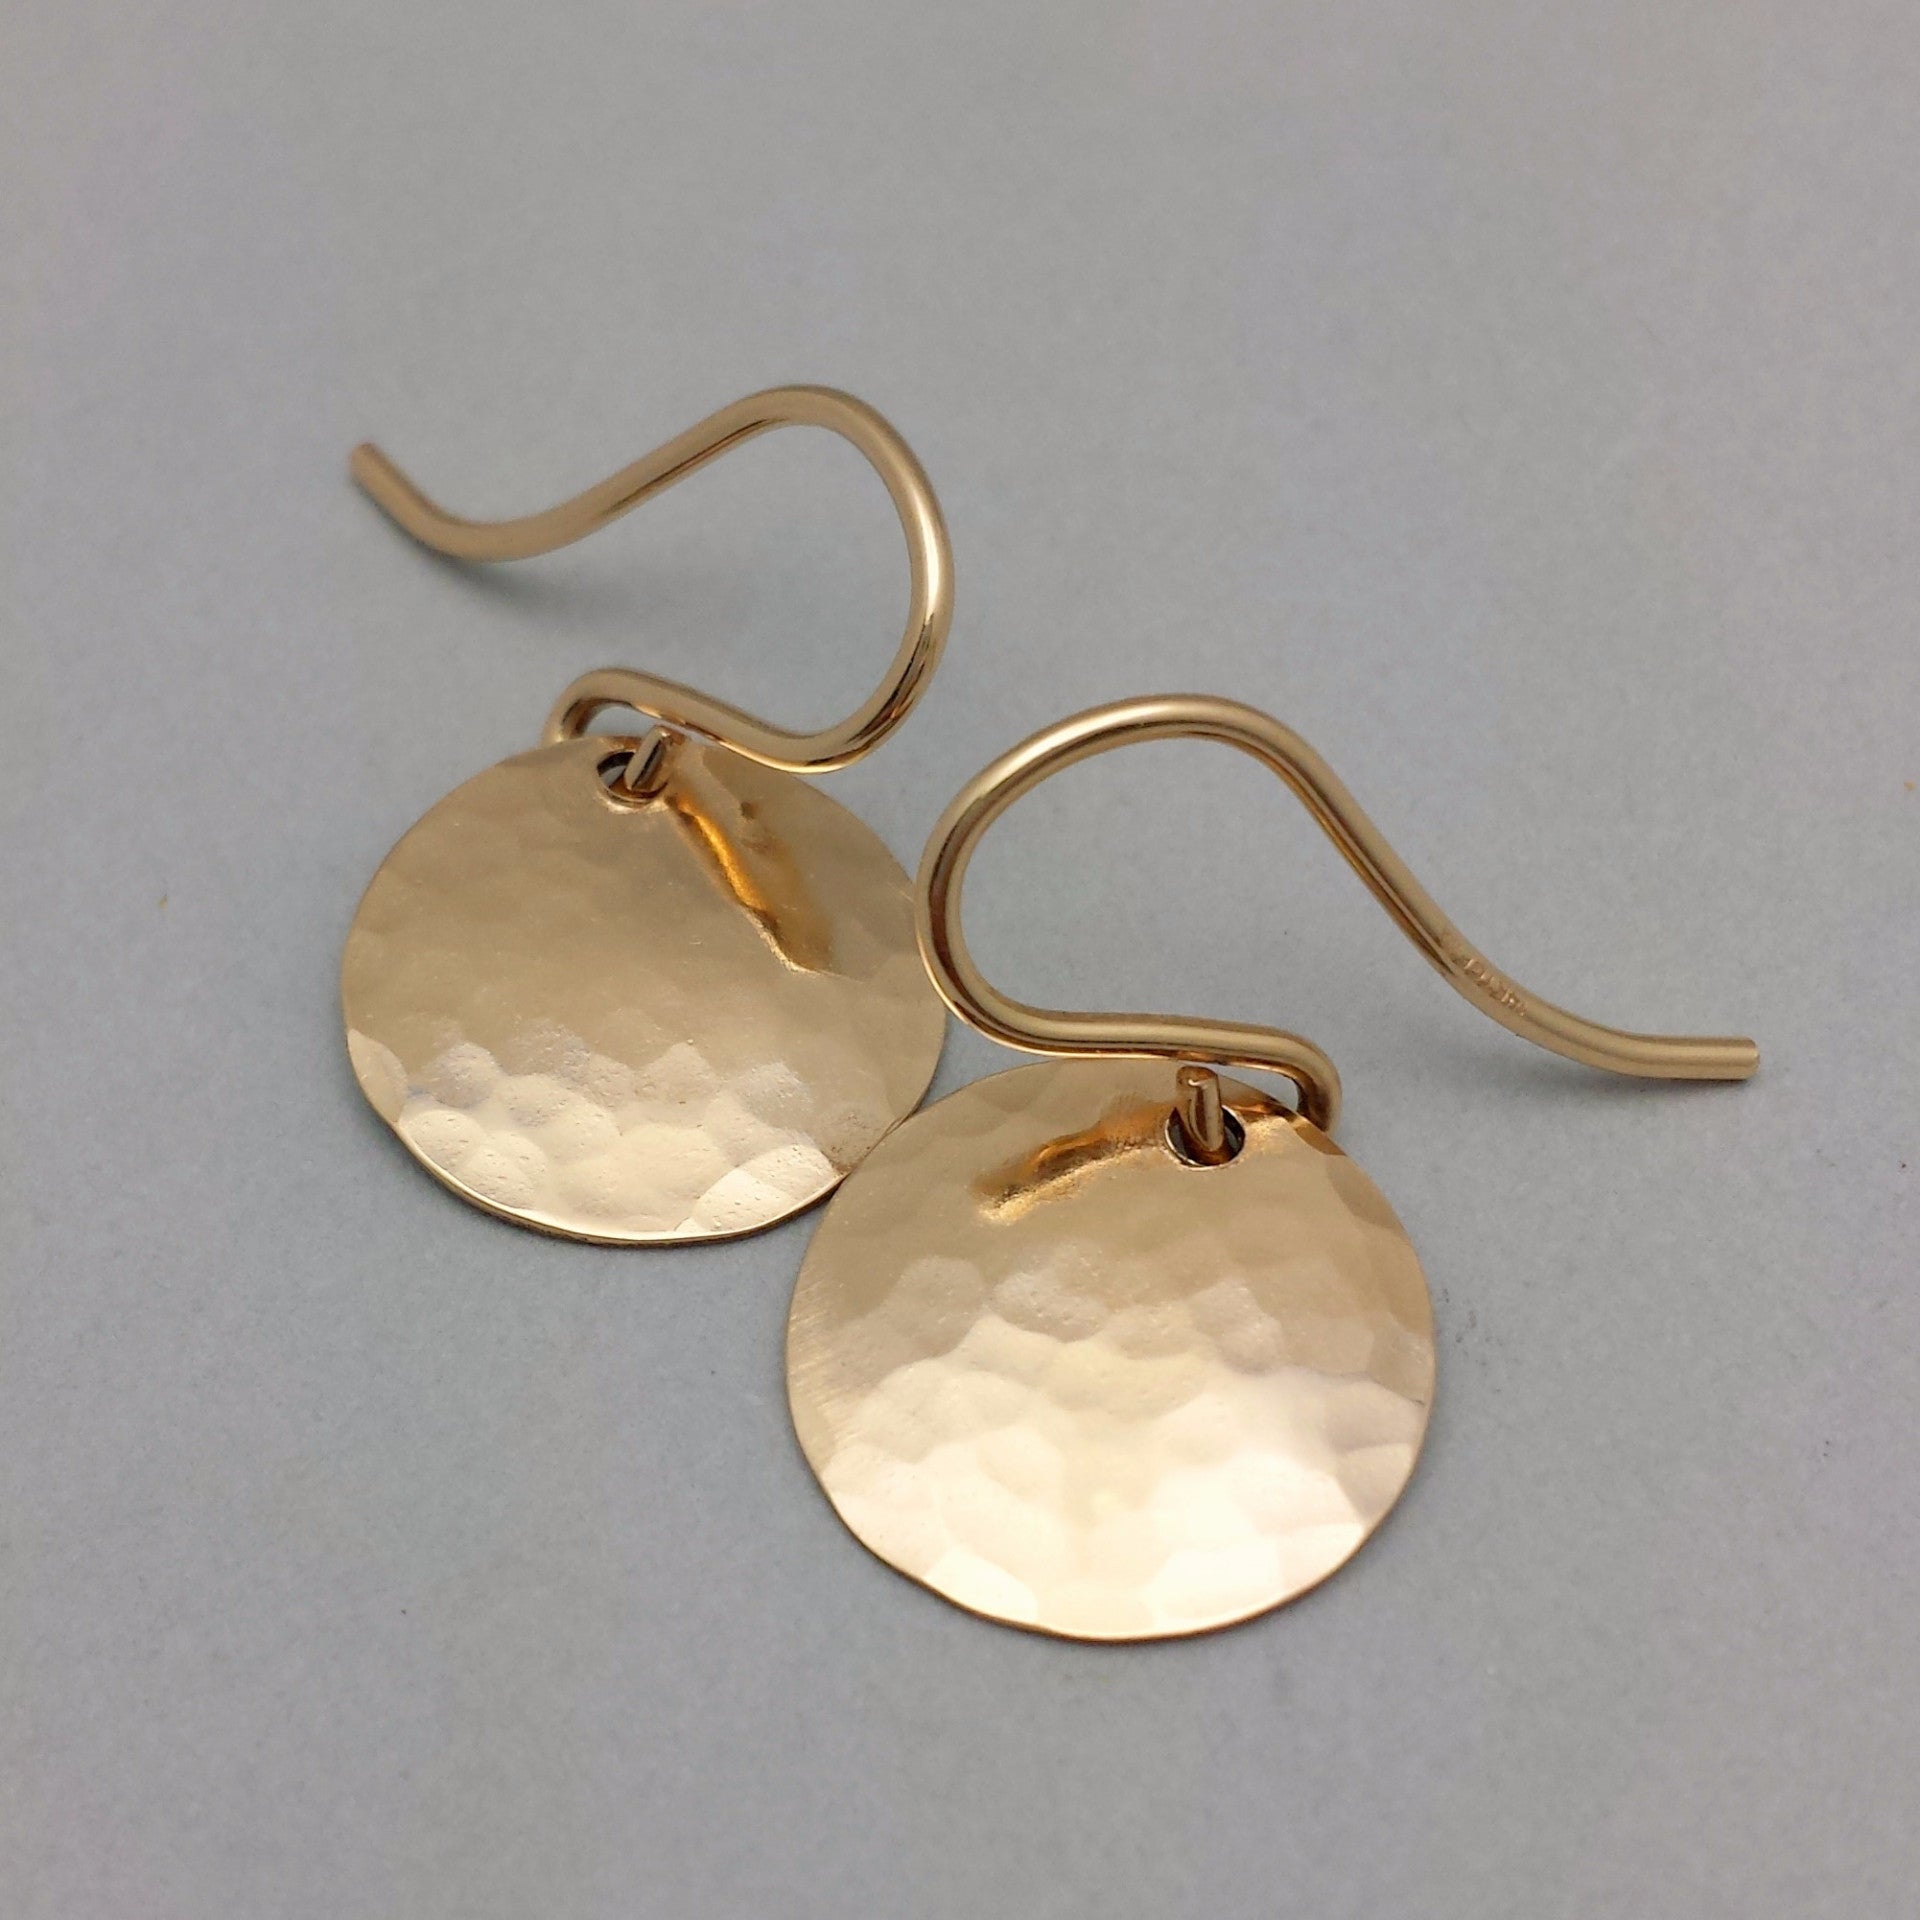 Shield Earrings / 14k Yellow Gold Filled / Convex Domed Disks / Rustic  Hammered Texture